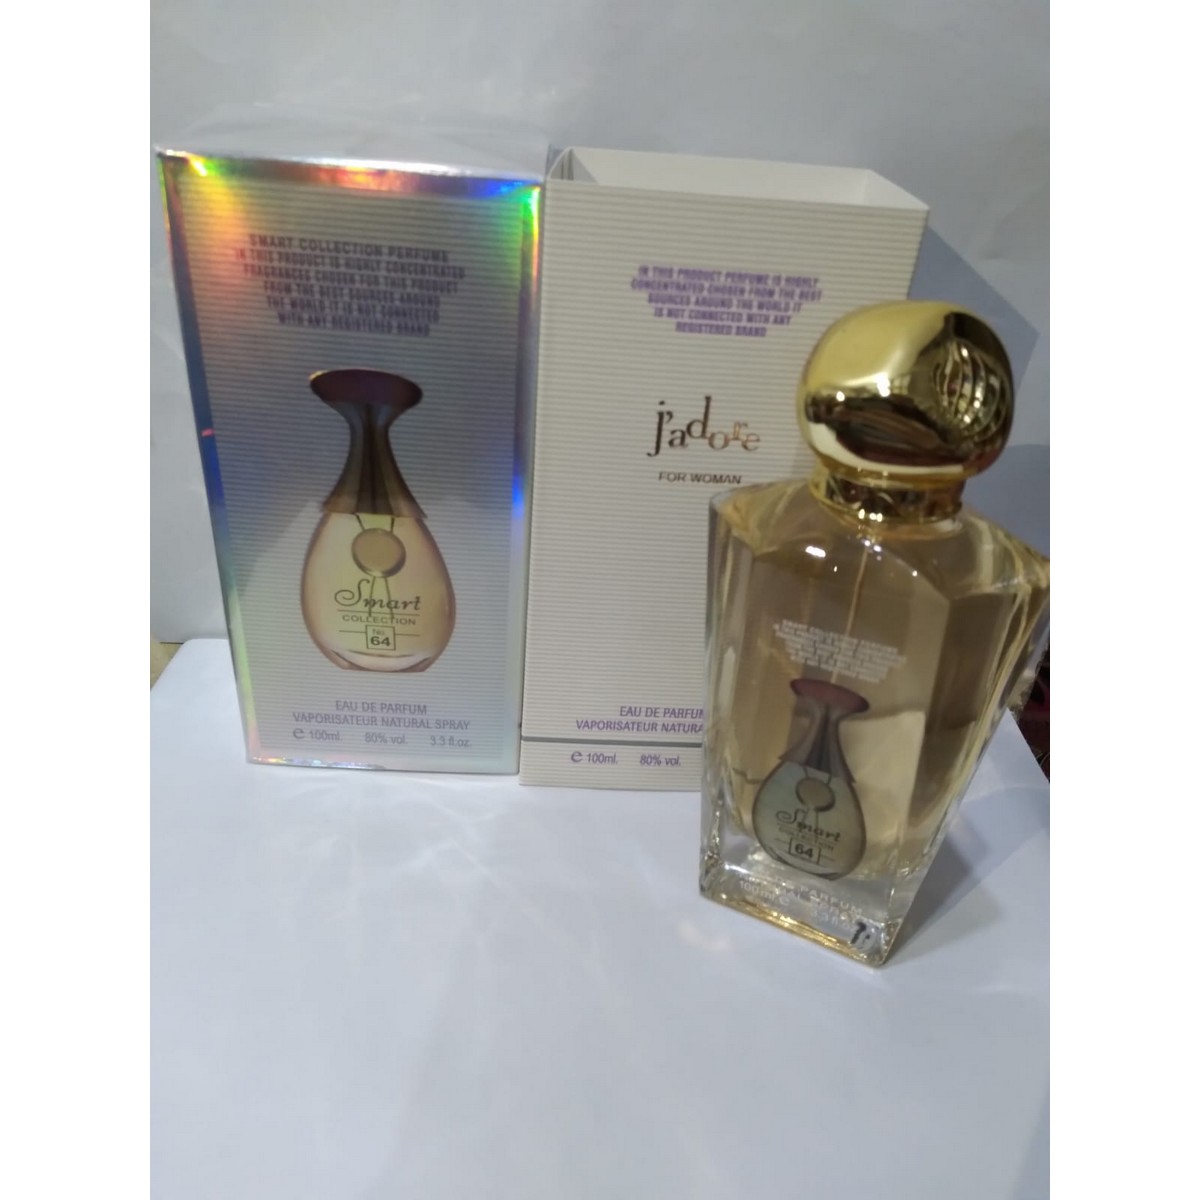 Smart Collection No 64 100ml Perfume For Women Price in Pakistan - View ...